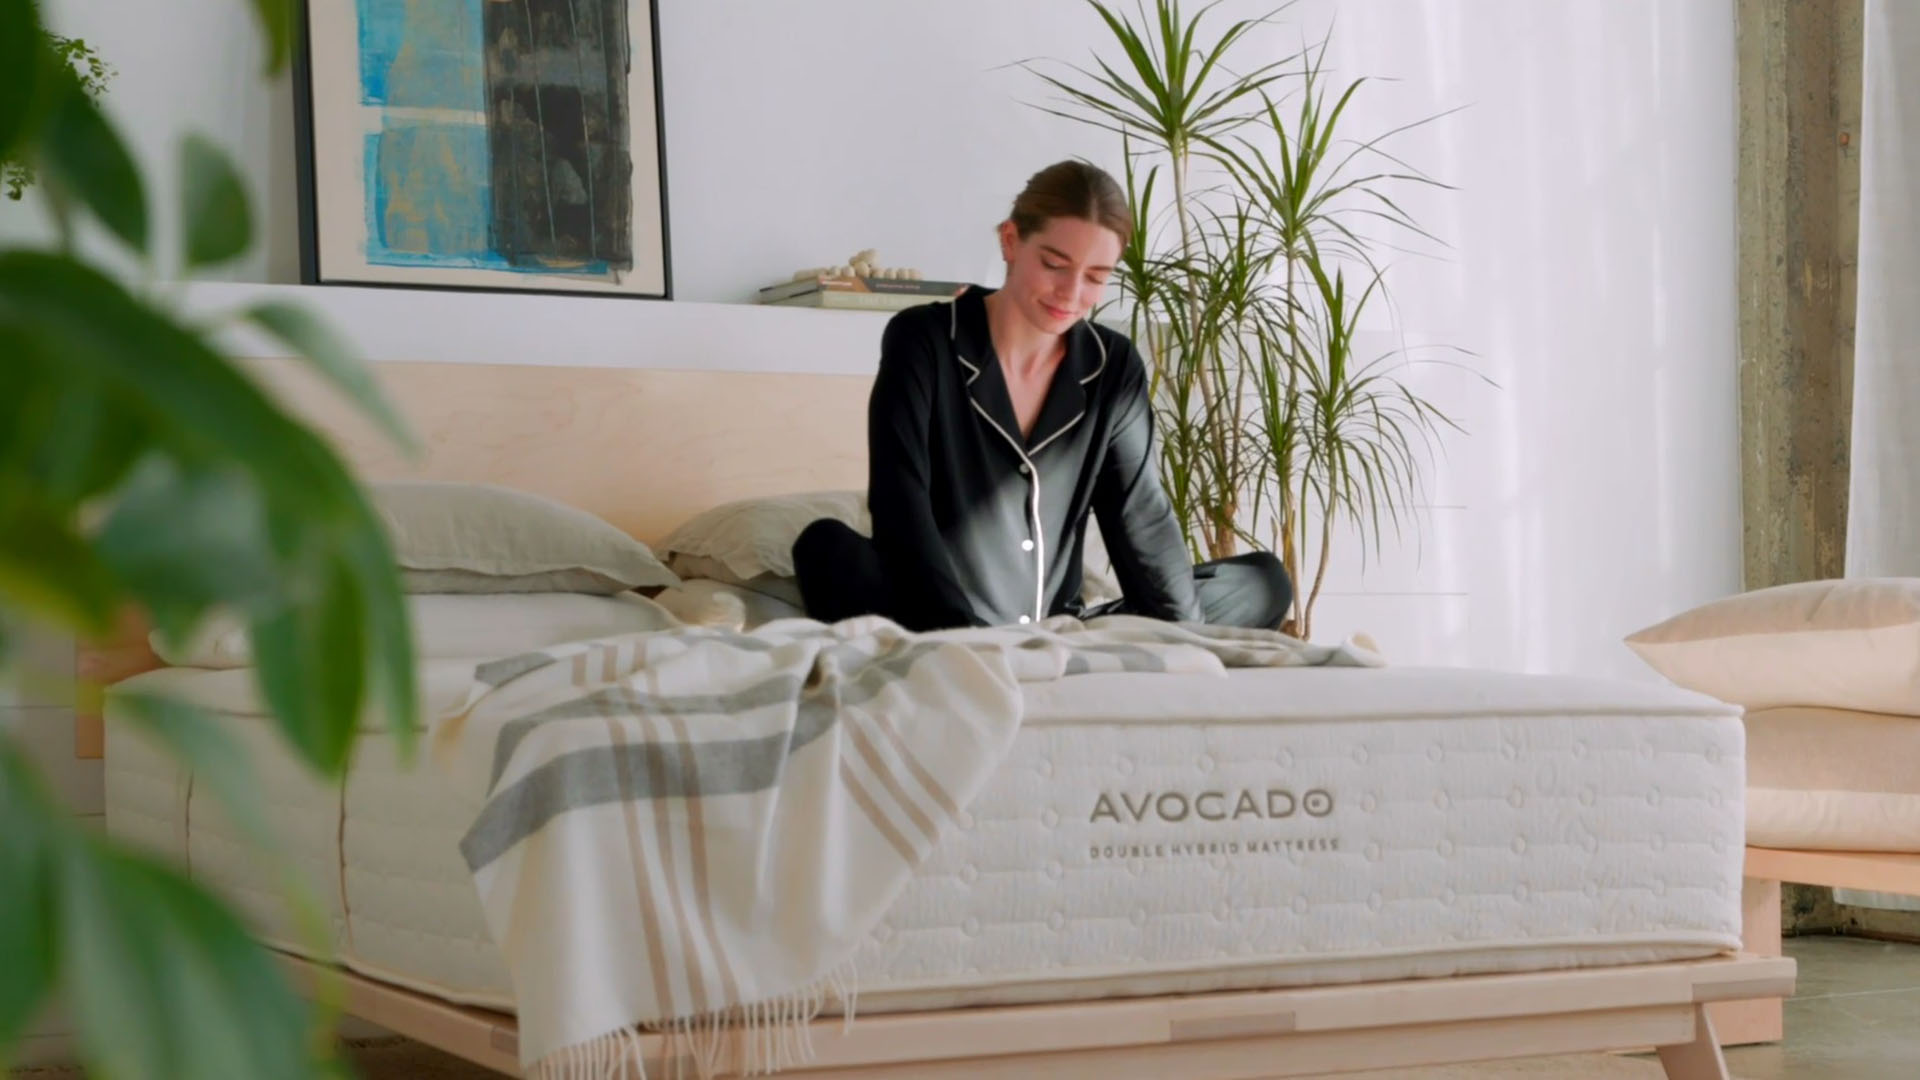 Where to buy Avocado Mattress in Brentwood, New York